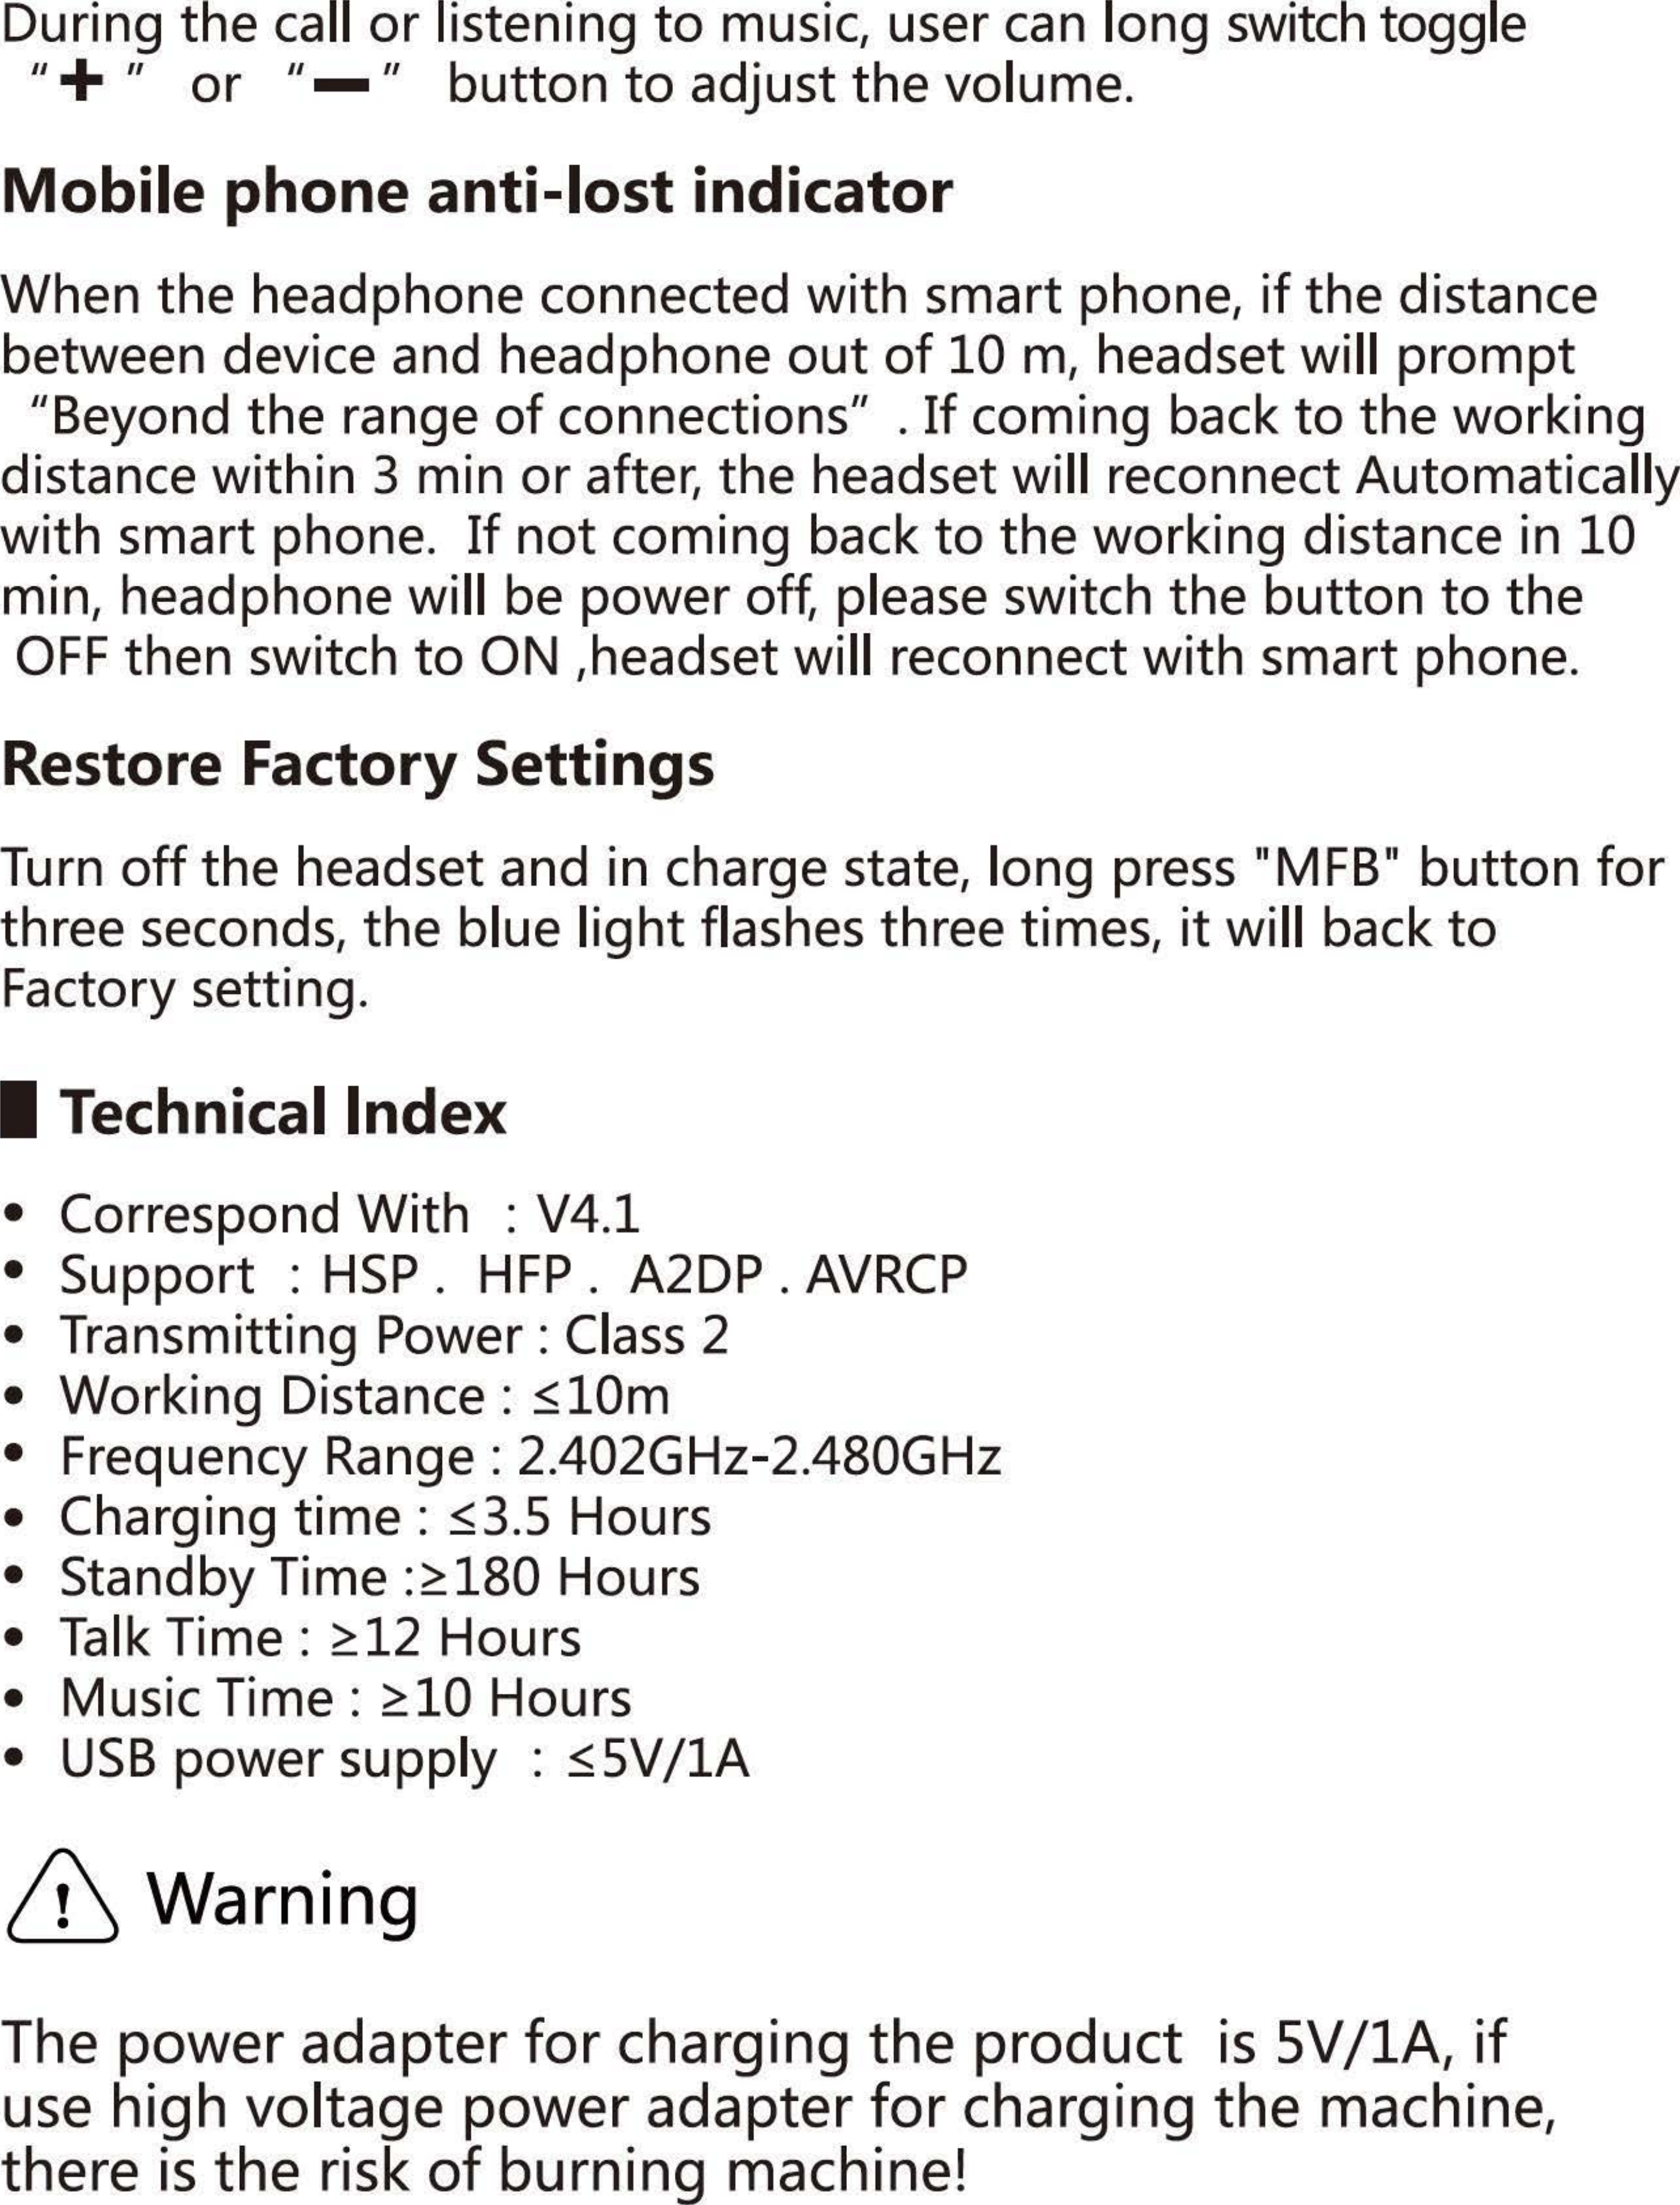 During the call or listening to music, user can long switch toggle 11 + 11 or 11  11 button to adjust the volume. Mobile phone anti-Iost indicator When the headphone connected with smart phone, if the distance between device and headphone out of 10 m, headset will prompt &quot;Beyond the range of connections&quot;  . If coming back to the working distance within 3 min or after, the headset will reconnect Automatically with smart phone. If not coming back to the working distance in 10 min, headphone will be power off, please switch the button to the OFF then switch to ON ,headset will reconnect with smart phone. Restore Factory Settings Turn off the headset and in charge state, long press &quot;MFB&quot; button for three seconds, the blue light flashes three times, it will back to Factory setti ng. Technicallndex •  Correspond With : V4.1 • Support : HSP.  HFP. A2DP. AVRCP •  Transmitting Power: Class 2 • Working Distance :三10m•  Frequency Range : 2.402GHz-2.480GHz •  Charging time :三3.5Hours •  Standby Time :三180Hours •  Talk Time :兰12Hours •  Music Time :注10Hours • USB power supply :三5Vj1AWa rn i ng The power adapter for charging the product is 5V /lA, if use high voltage power adapter for charging the machine, there is the risk of burning machine! 